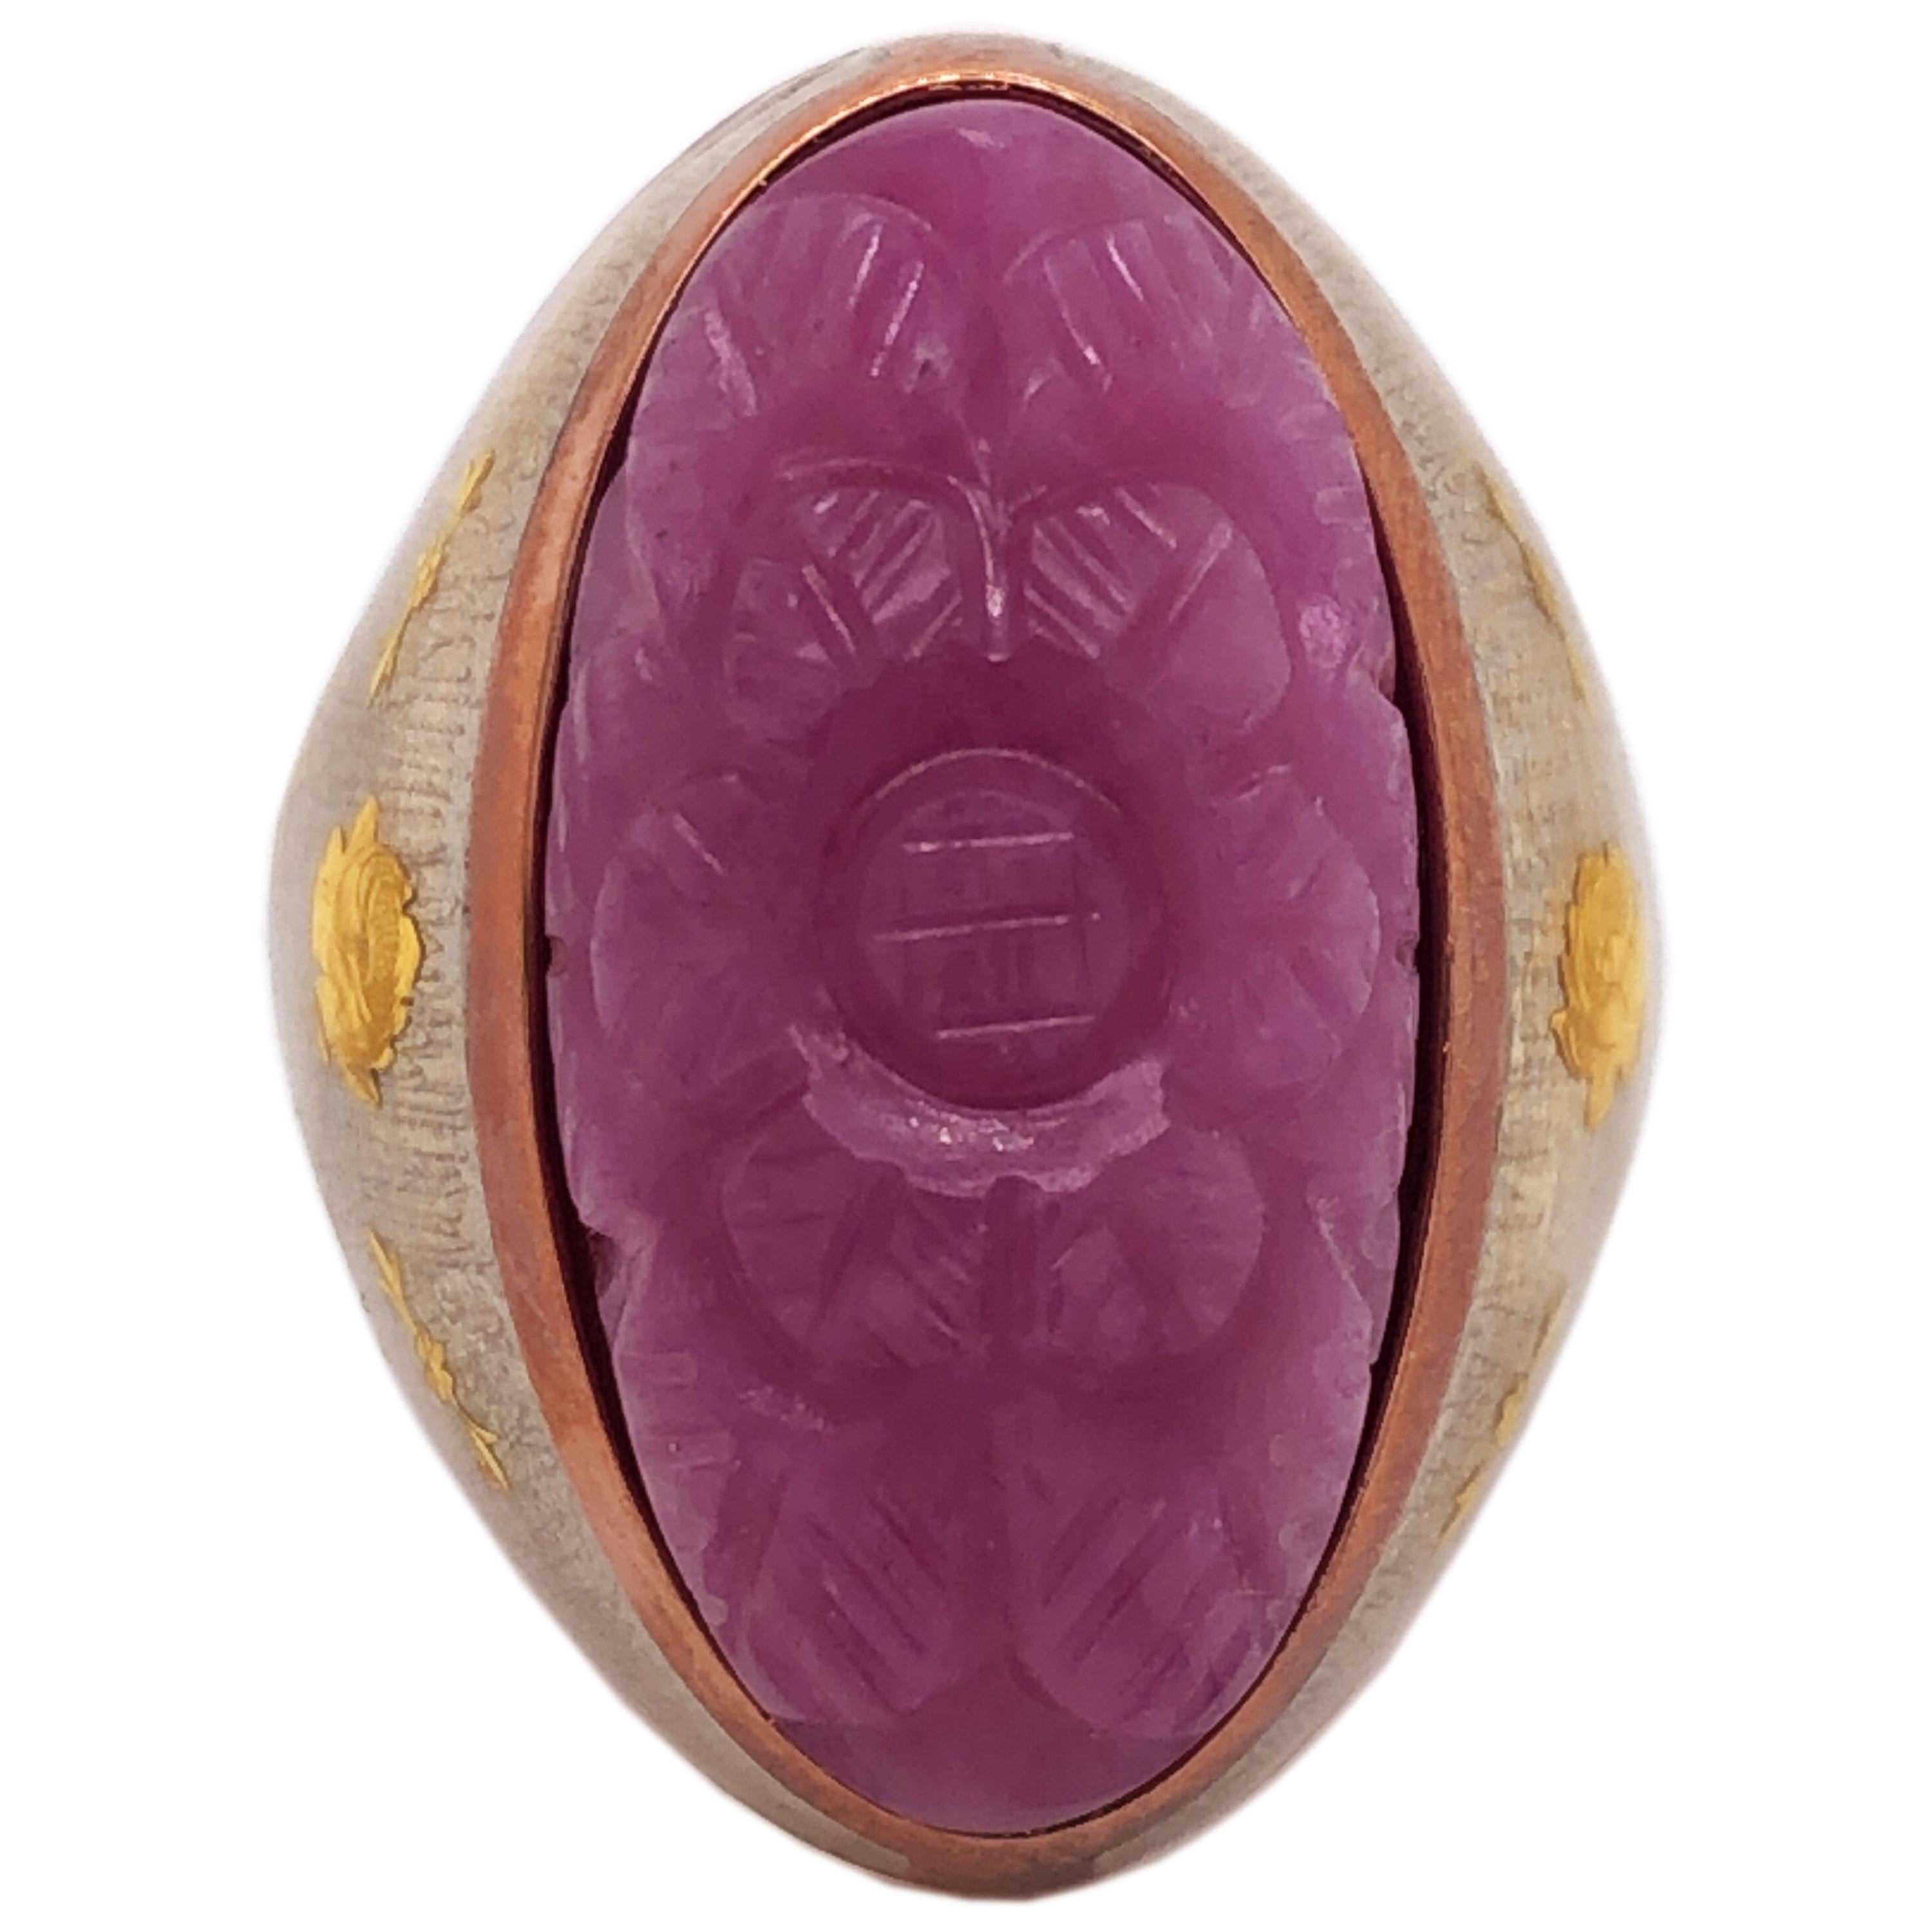 Contemporary, Unique yet Chic Cocktail Ring Featuring a 27.95 Kt Natural Hand Carved Pink Sapphire Cabochon in a 24kt Yellow Gold Roses and Leaves Hand Enameled Sterling Silver Rose Gold Plated Setting.
Awesome, One-of-a-kind Hand Carved Pink